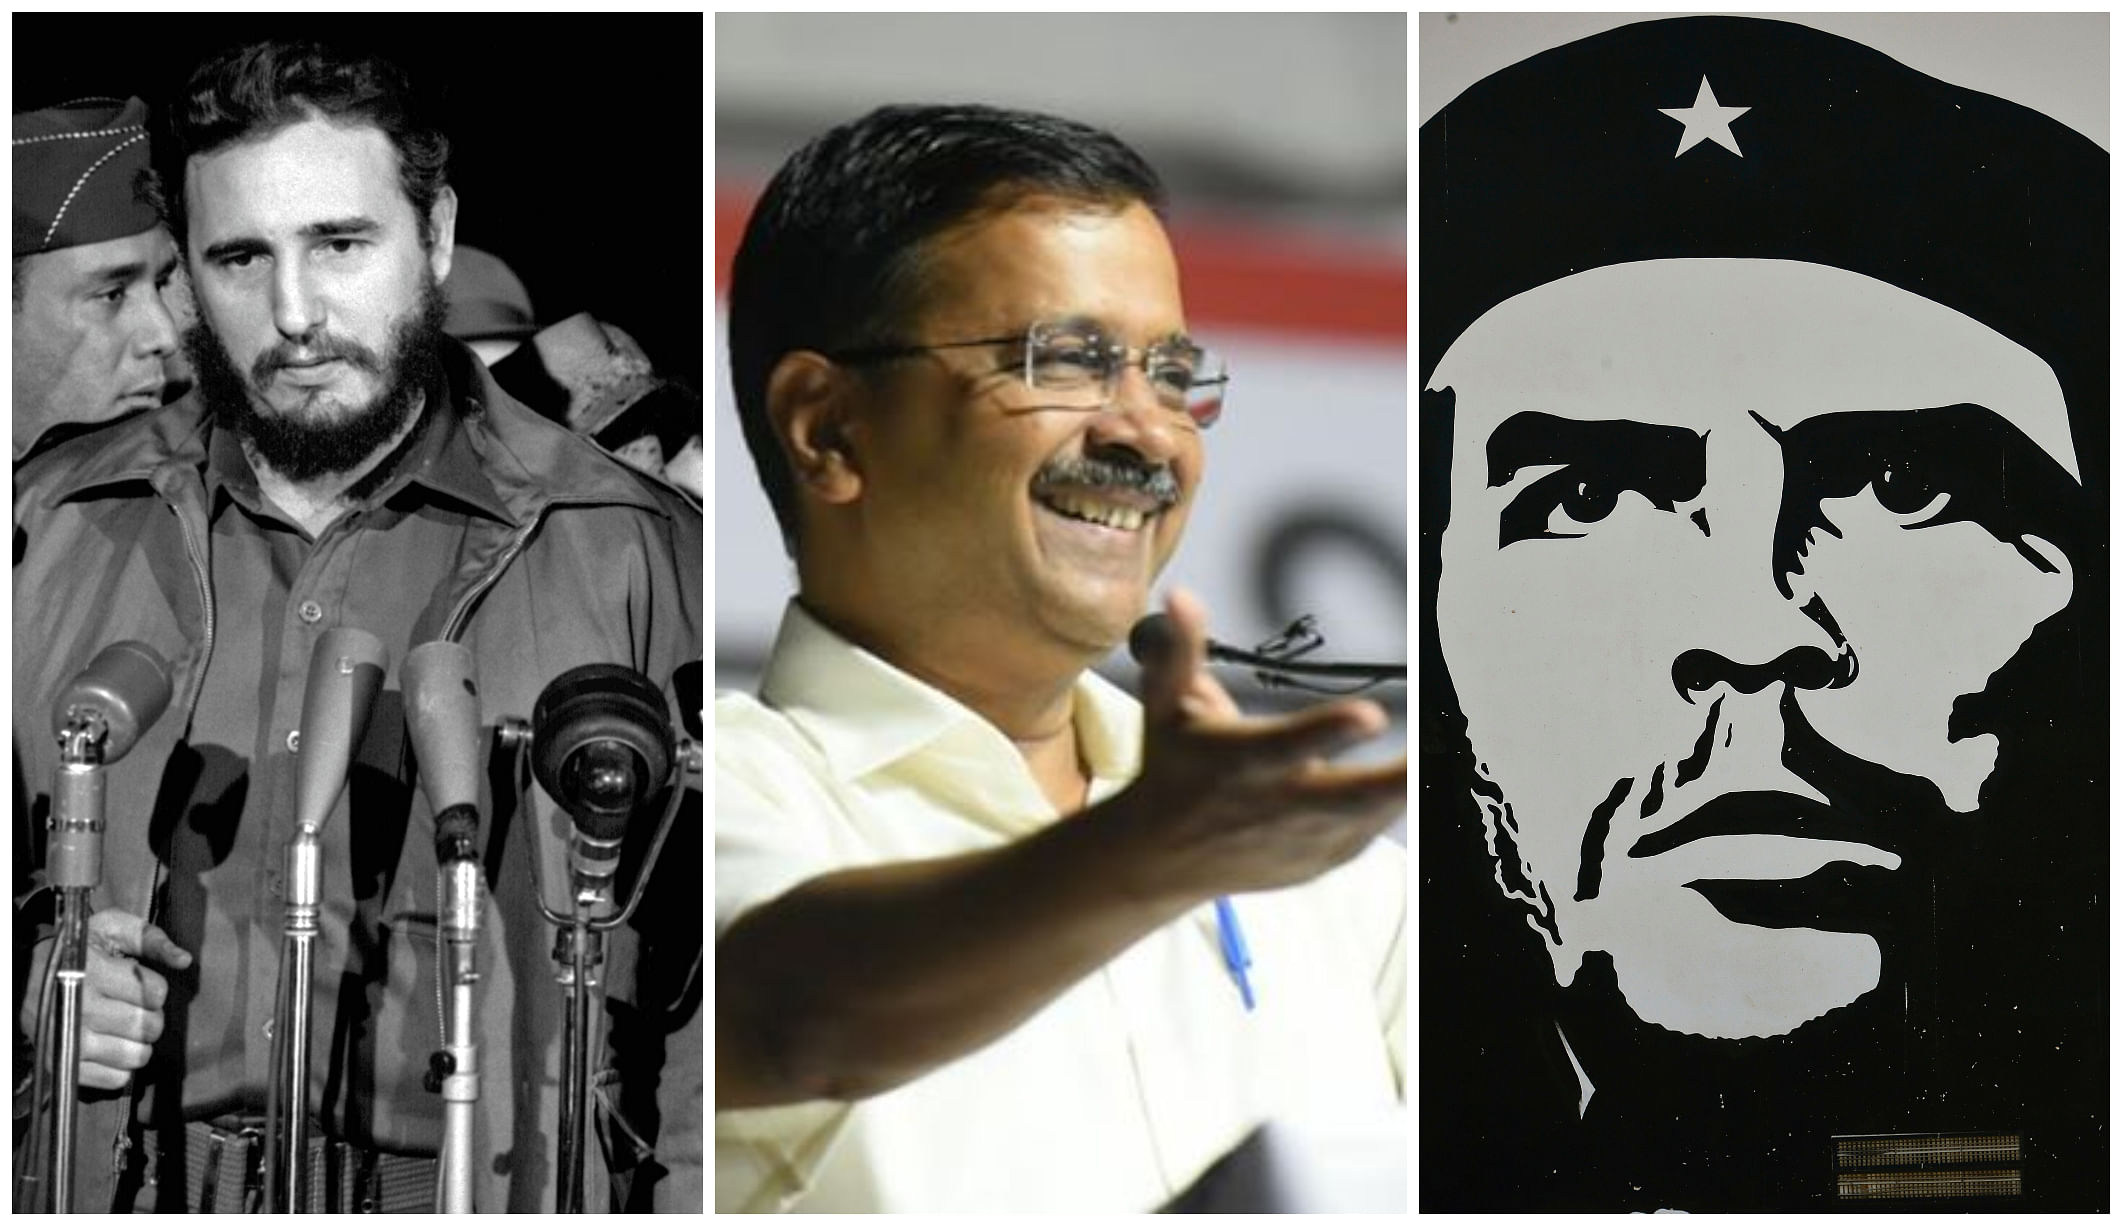 Fidel Castro(L), Arvind Kejriwal(C), Che Guevara(R) (Photos by Wikimedia Commons and Facebook)